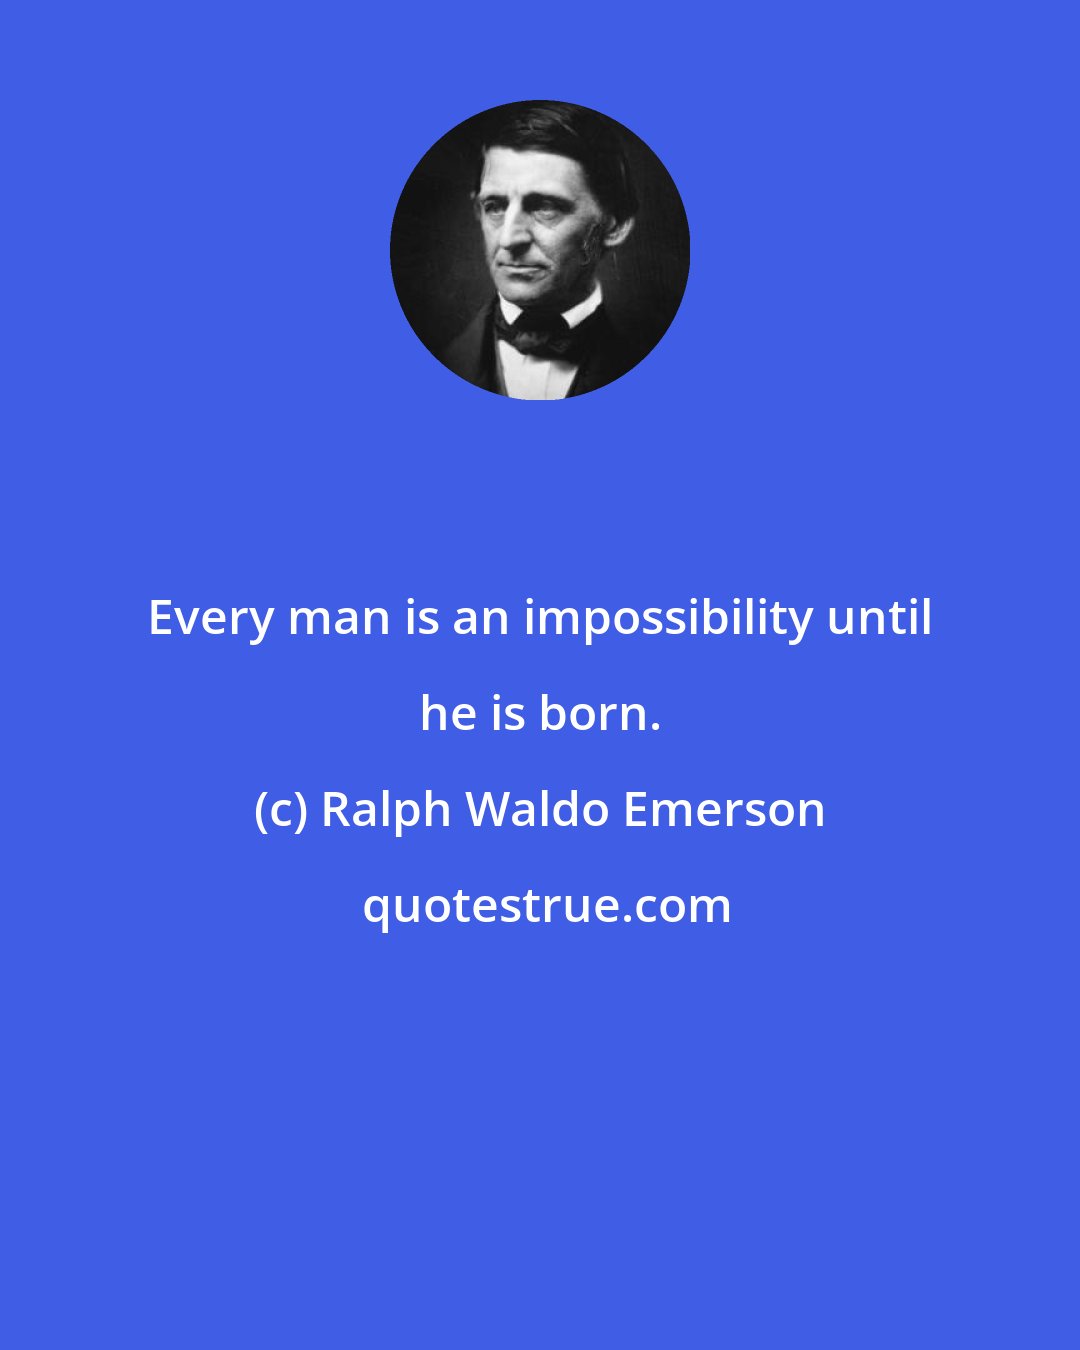 Ralph Waldo Emerson: Every man is an impossibility until he is born.